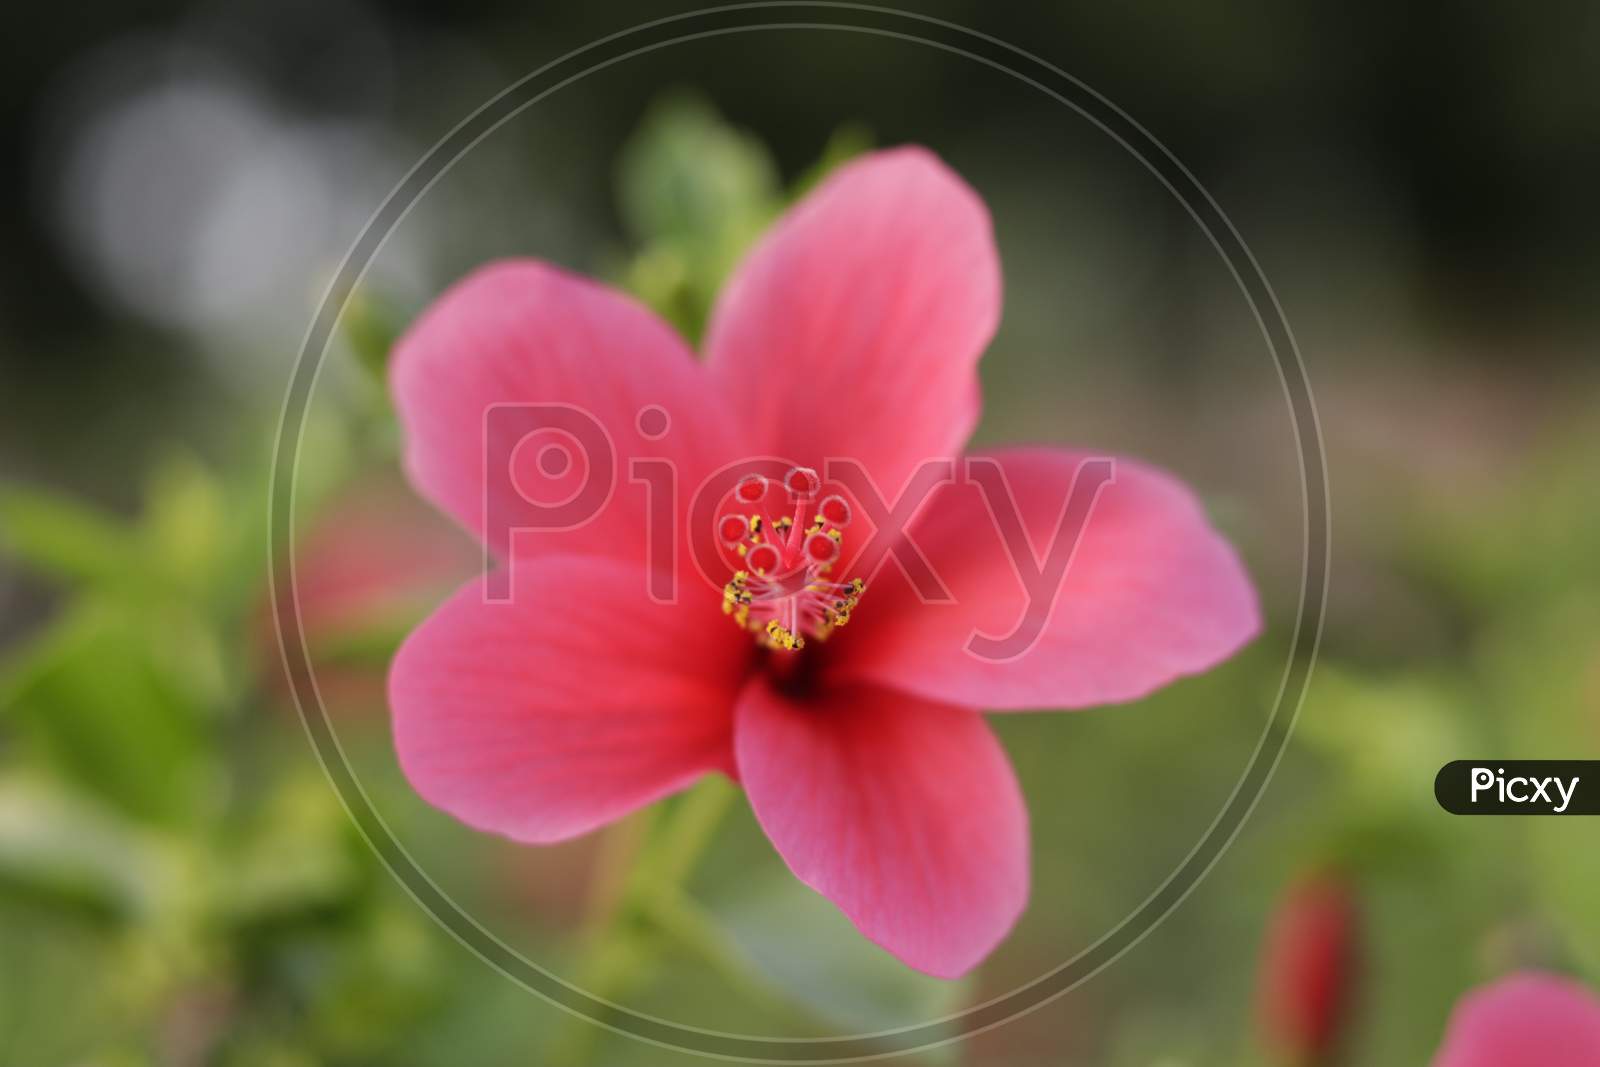 Red hibiscus flowers on a green background that are blooming very beautiful